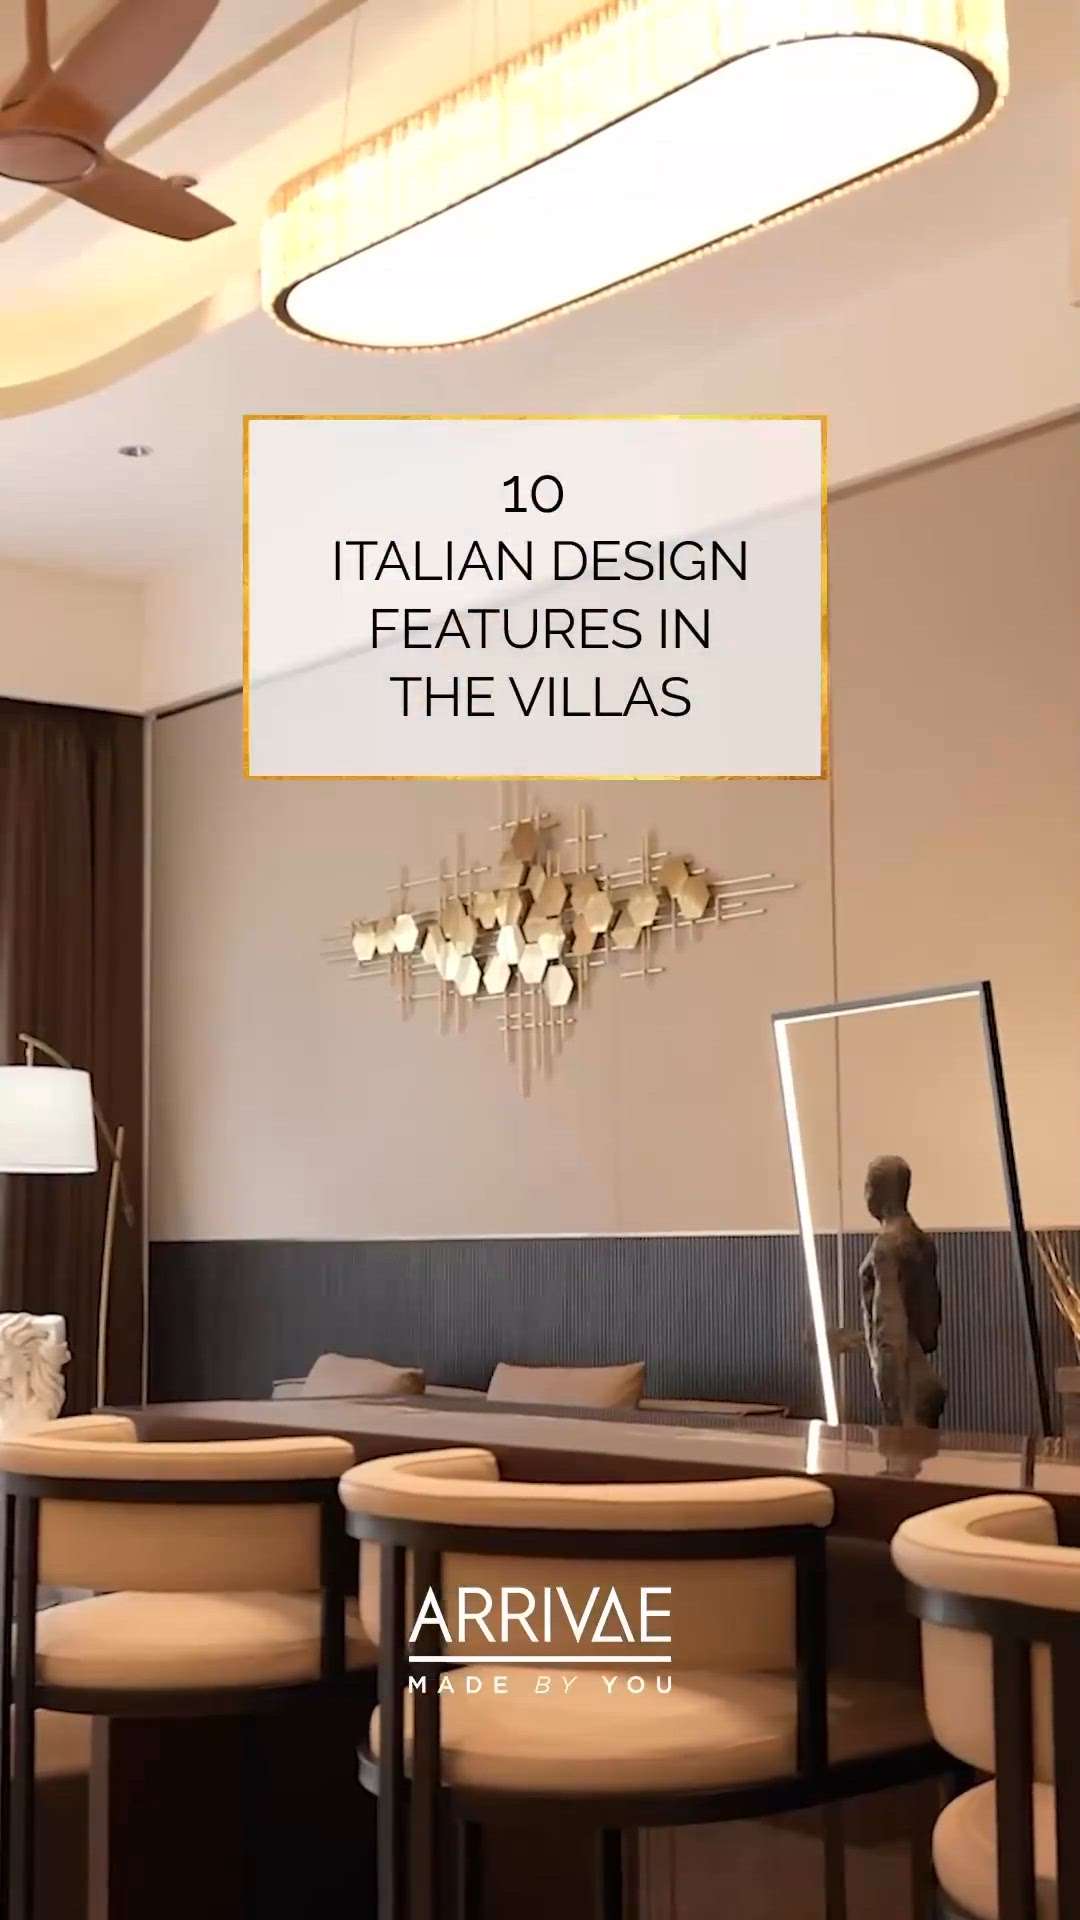 All this month we celebrate #LaDolceVita and the magic of Italy  Our incredibly luxe villas in #Gurugram designed for @anantrajlimited feature our best-selling Italian design themes for that exclusive, international design aesthetic — here are 10 examples of #Italiandesign by #Arrivae.

#luxuryvilla #luxuryvillas #luxurylifestyle #gurgaon #gurugram #gurgaonlife #villadesign #villalife #villasofinstagram #Anantraj #luxelife #luxeliving #luxelifestyle #luxeinteriors #italianstyle #italianlifestyle